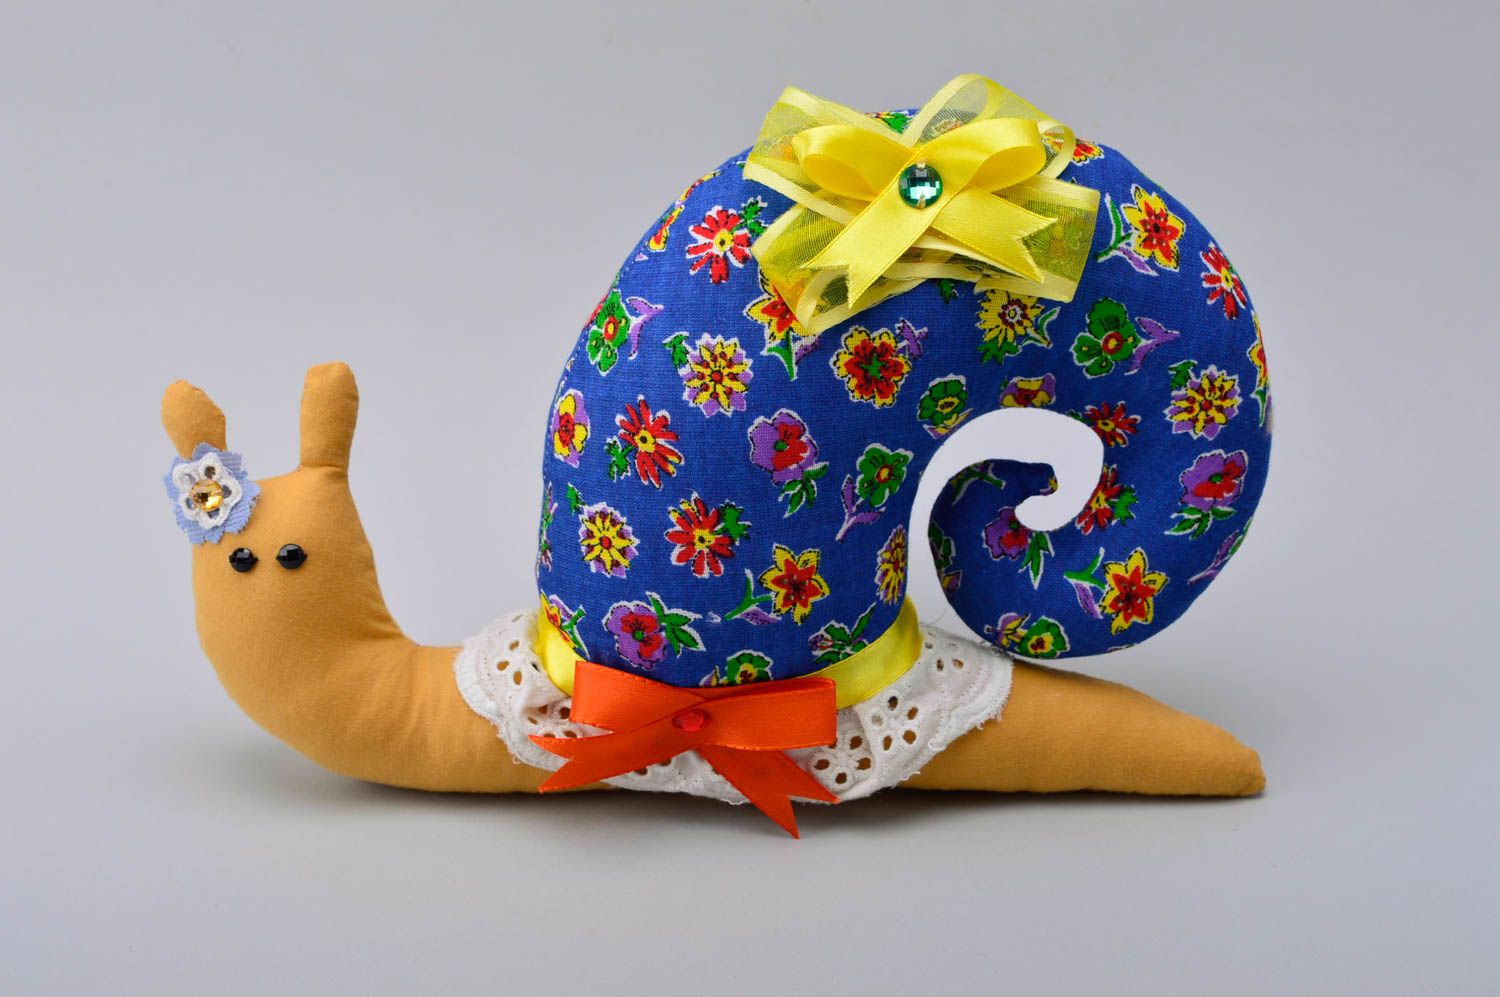 Handmade soft toy snail toy floral fabric stuffed animals birthday gifts for kid photo 3